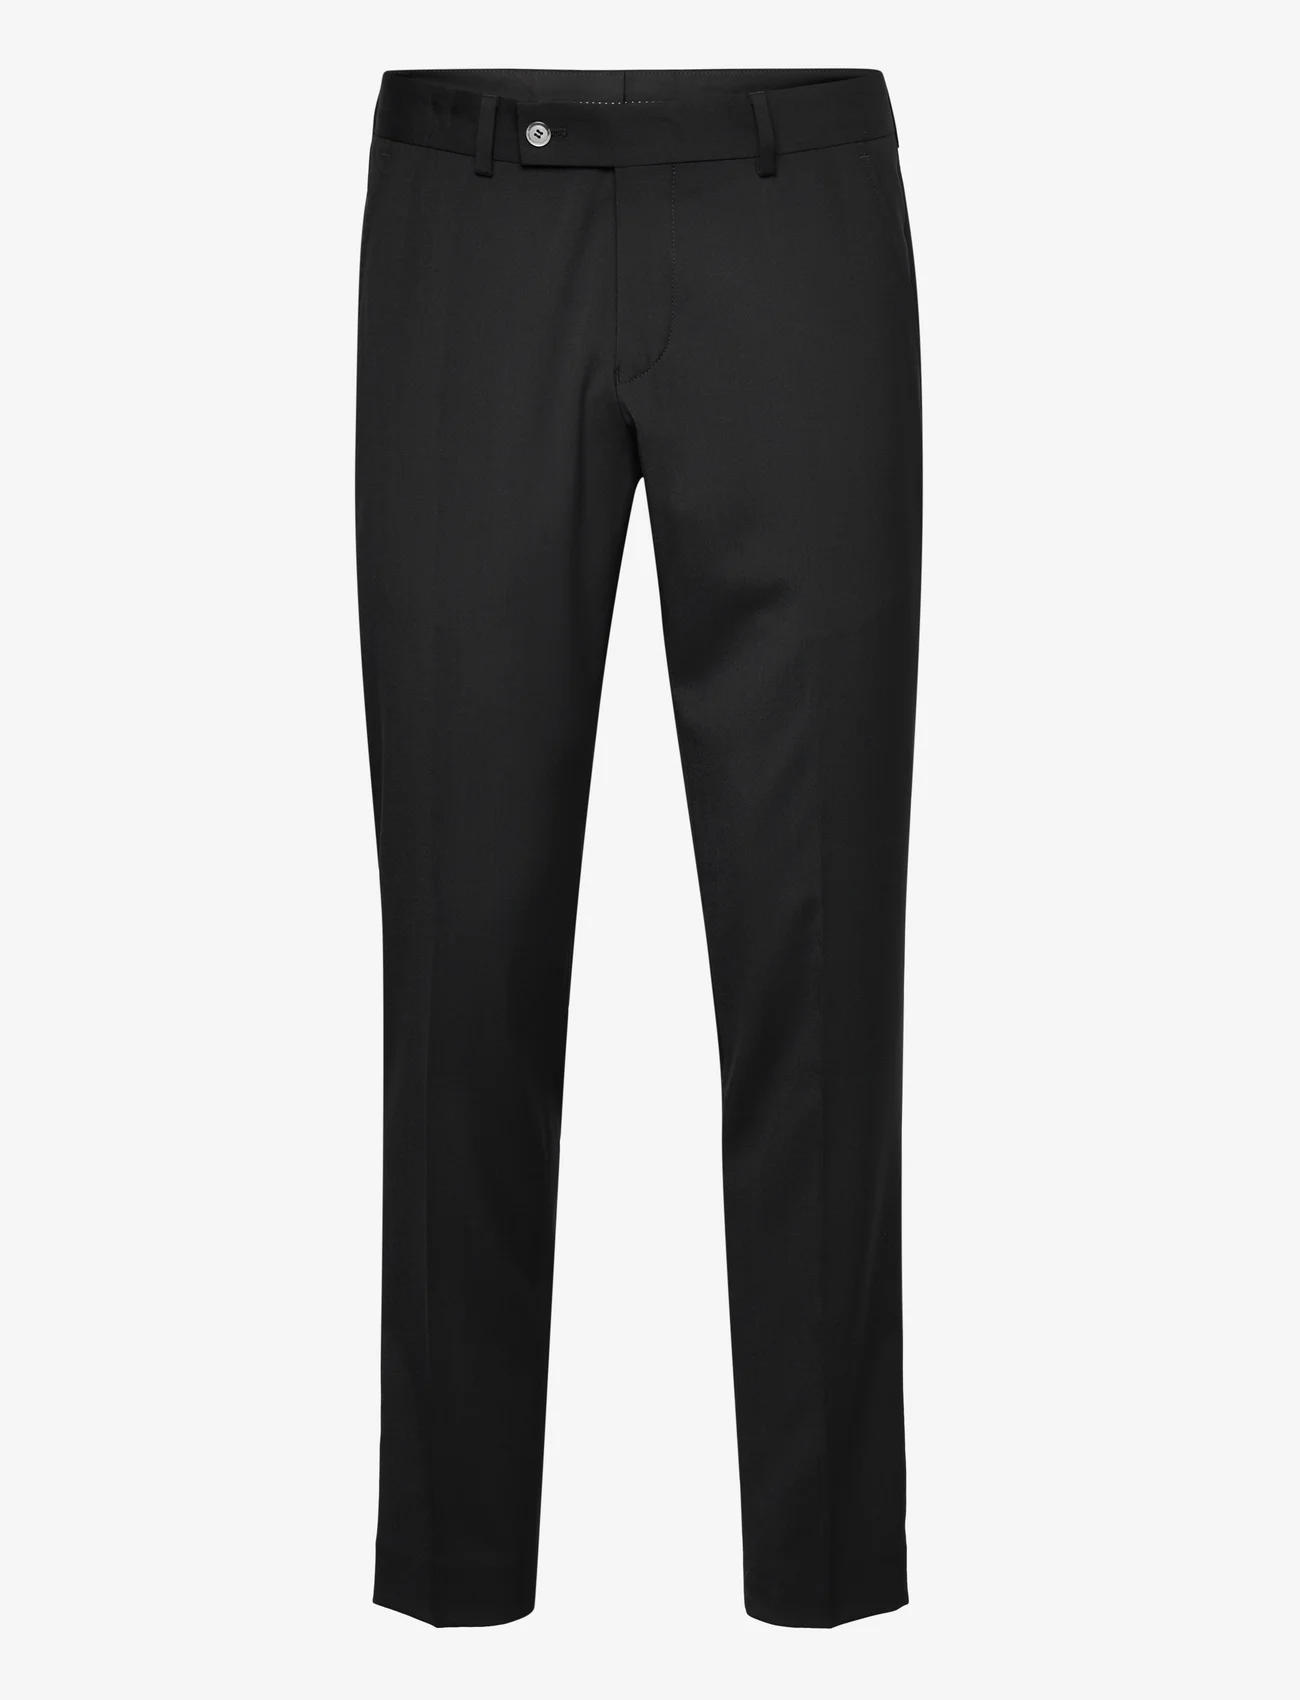 SIR of Sweden - Sven Trousers - nordic style - black - 0